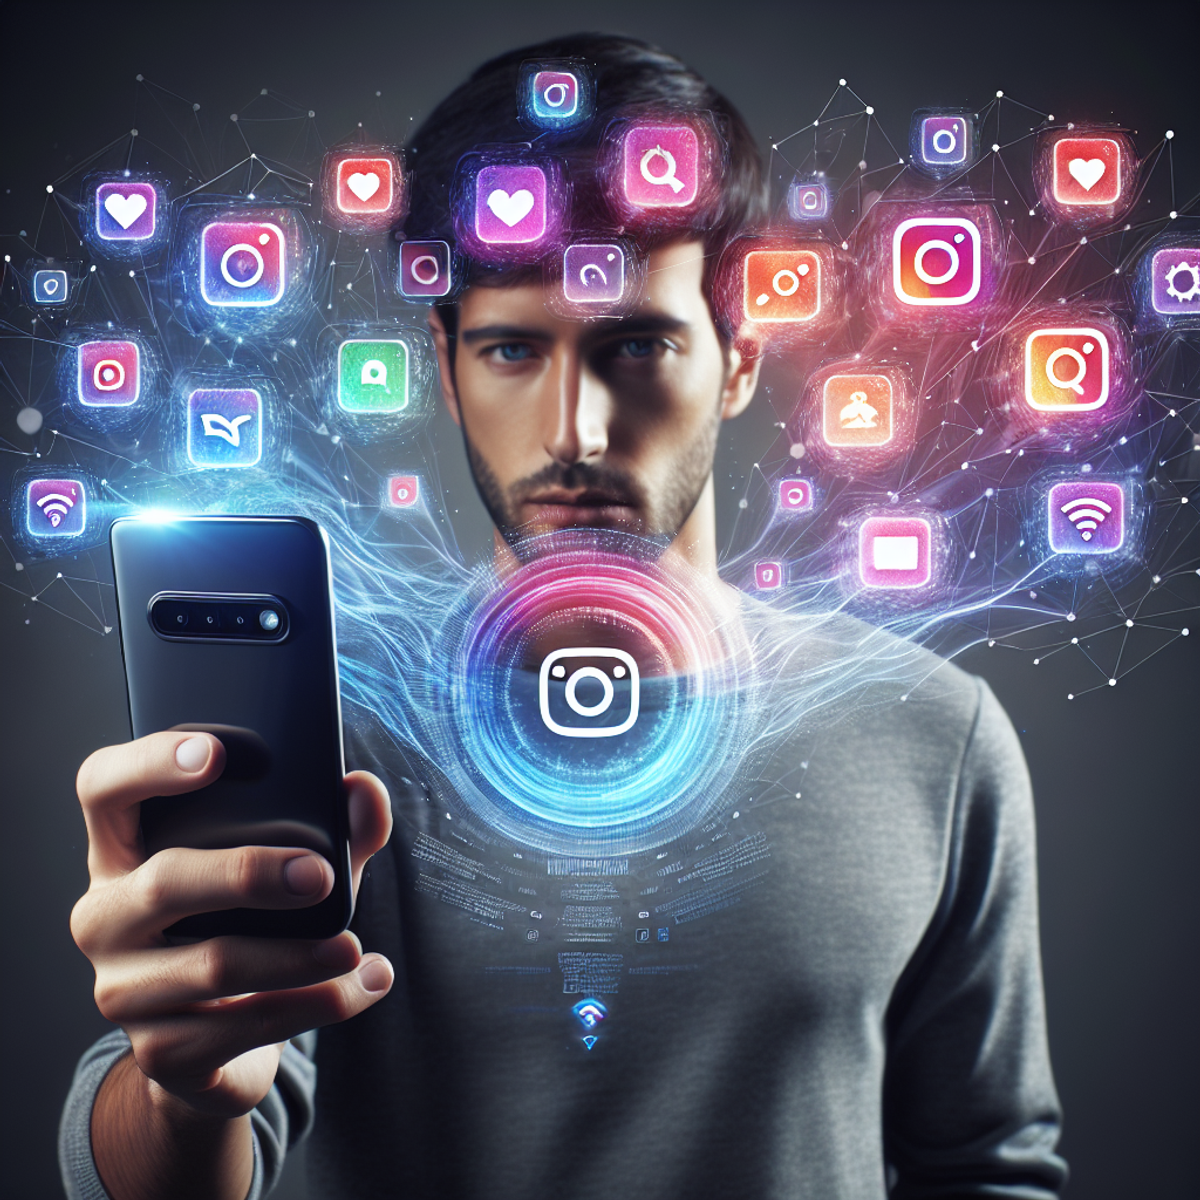 A Hispanic male holding a smartphone with an abstract AI logo on the screen, surrounded by vivid Instagram post graphics.